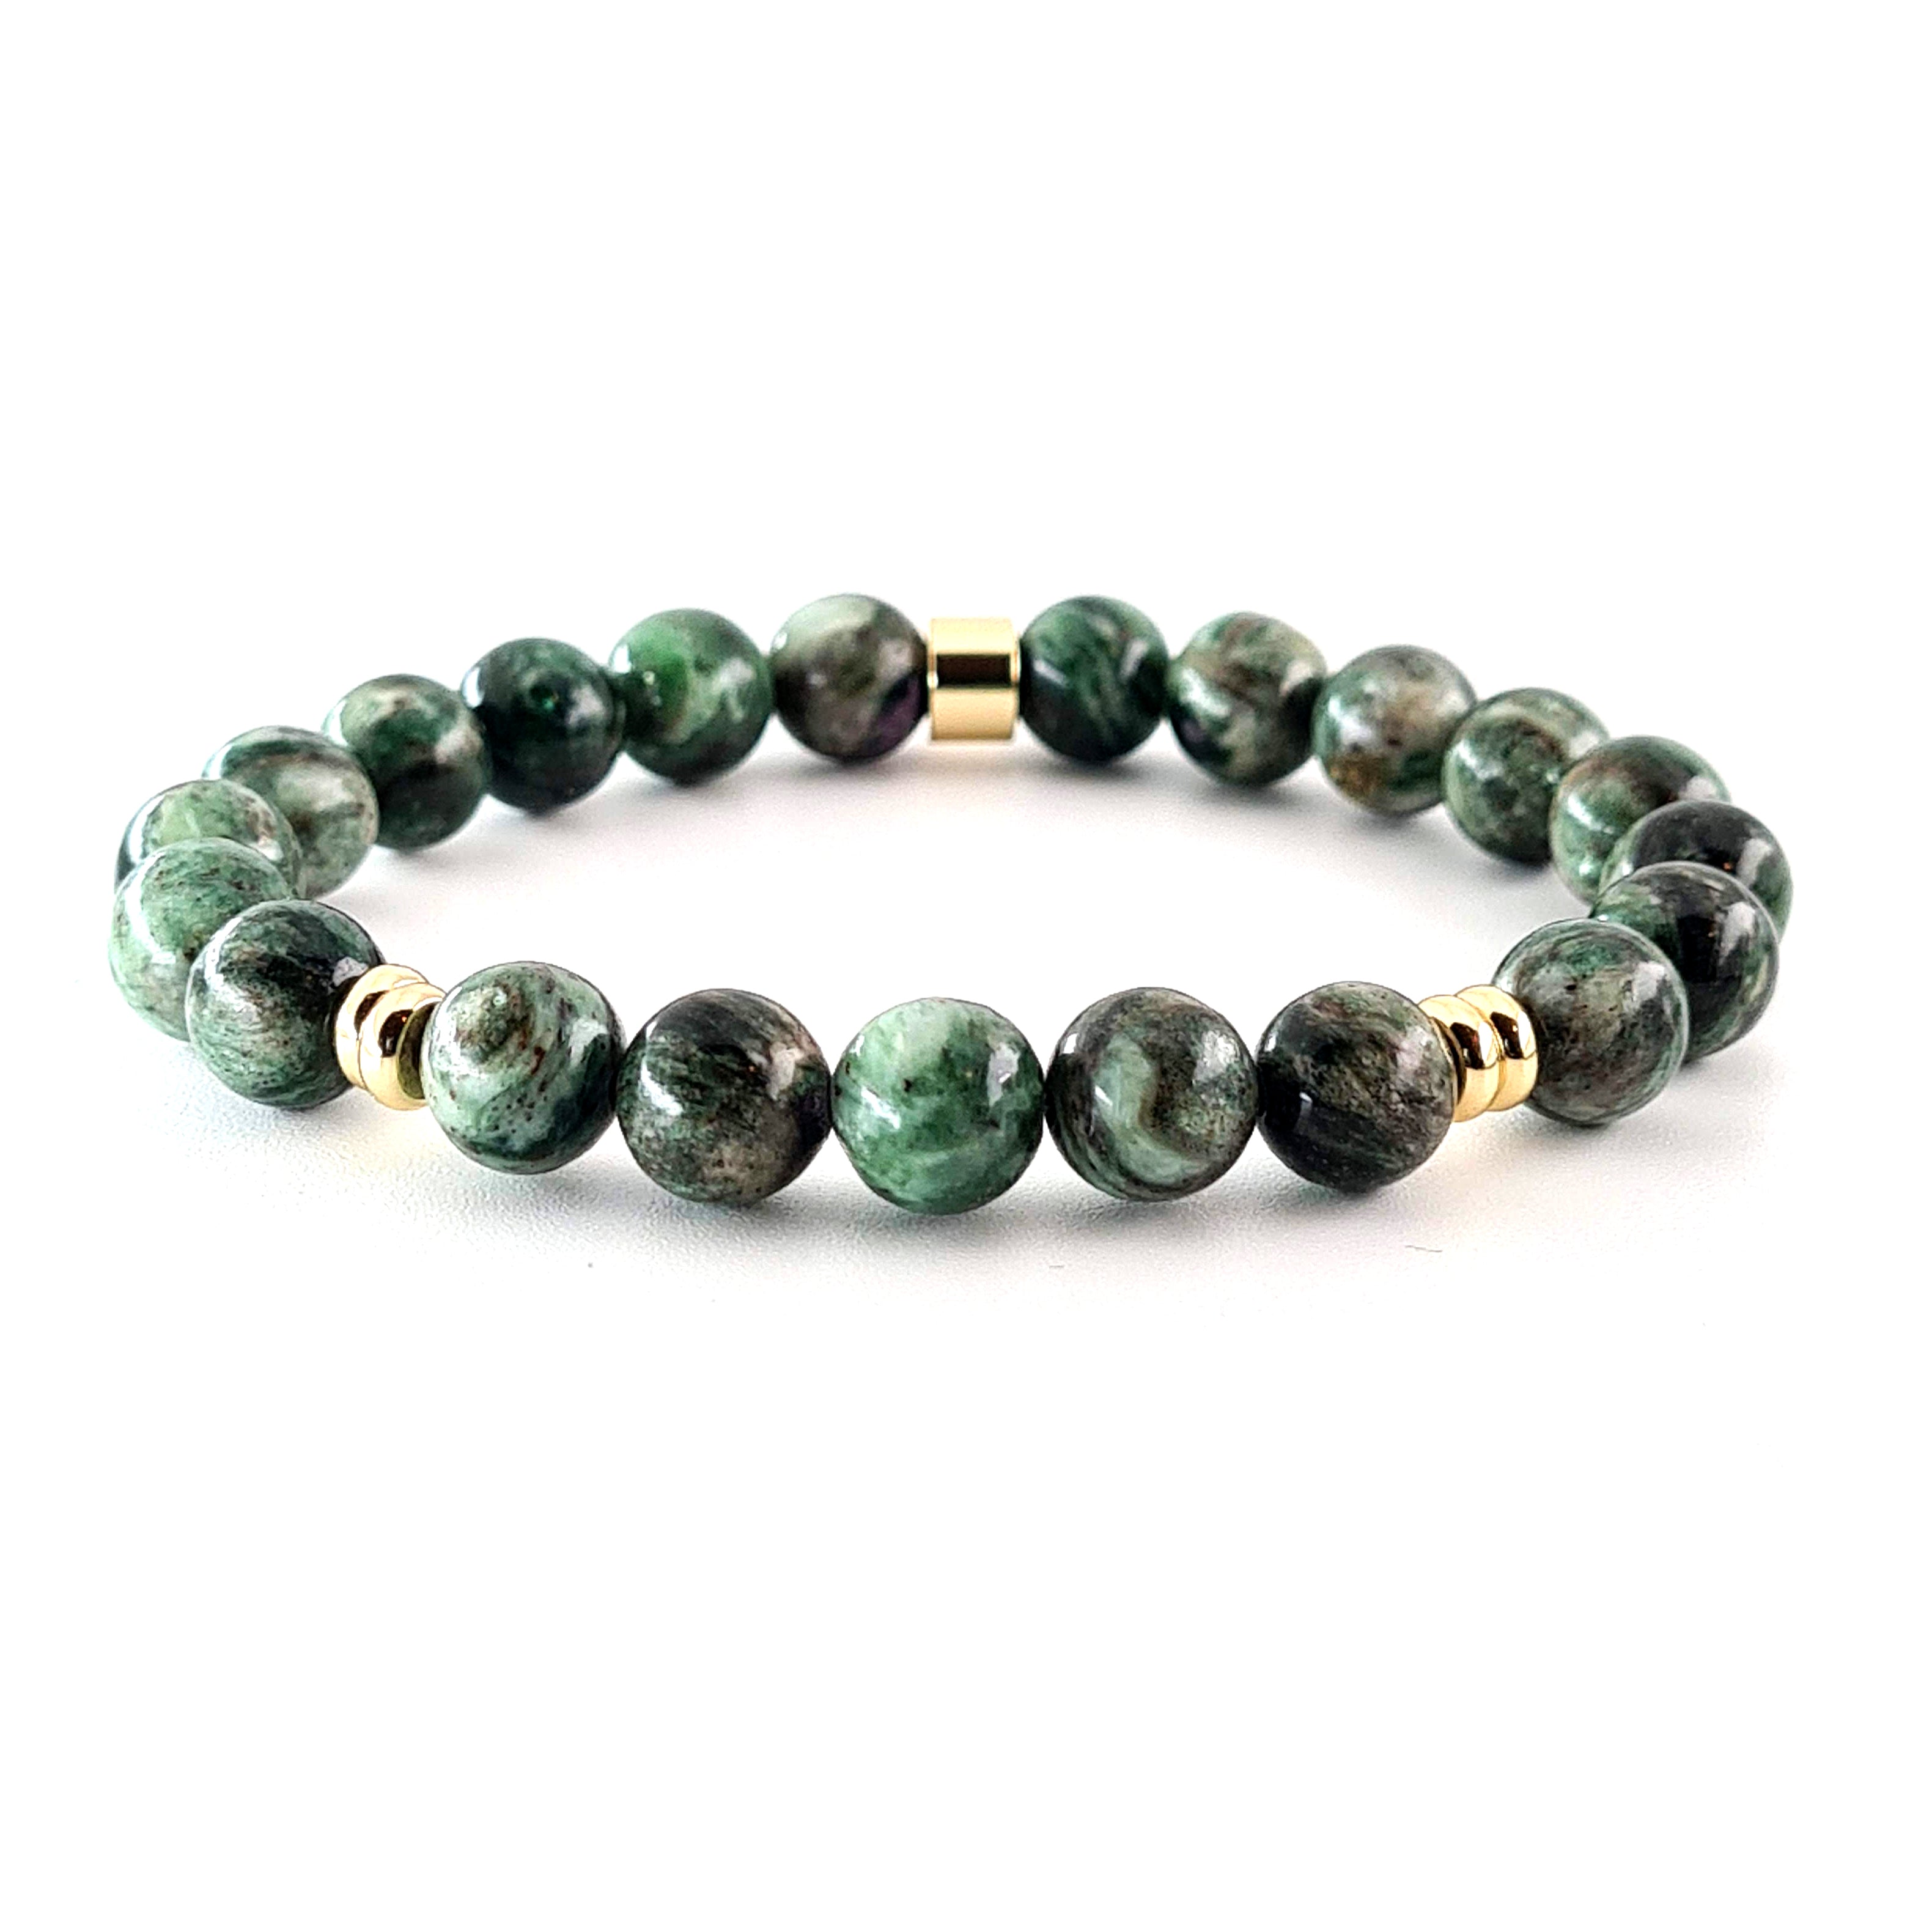 8mm Green Lepidolite Gemstone Bracelet with 18ct gold plated accessories